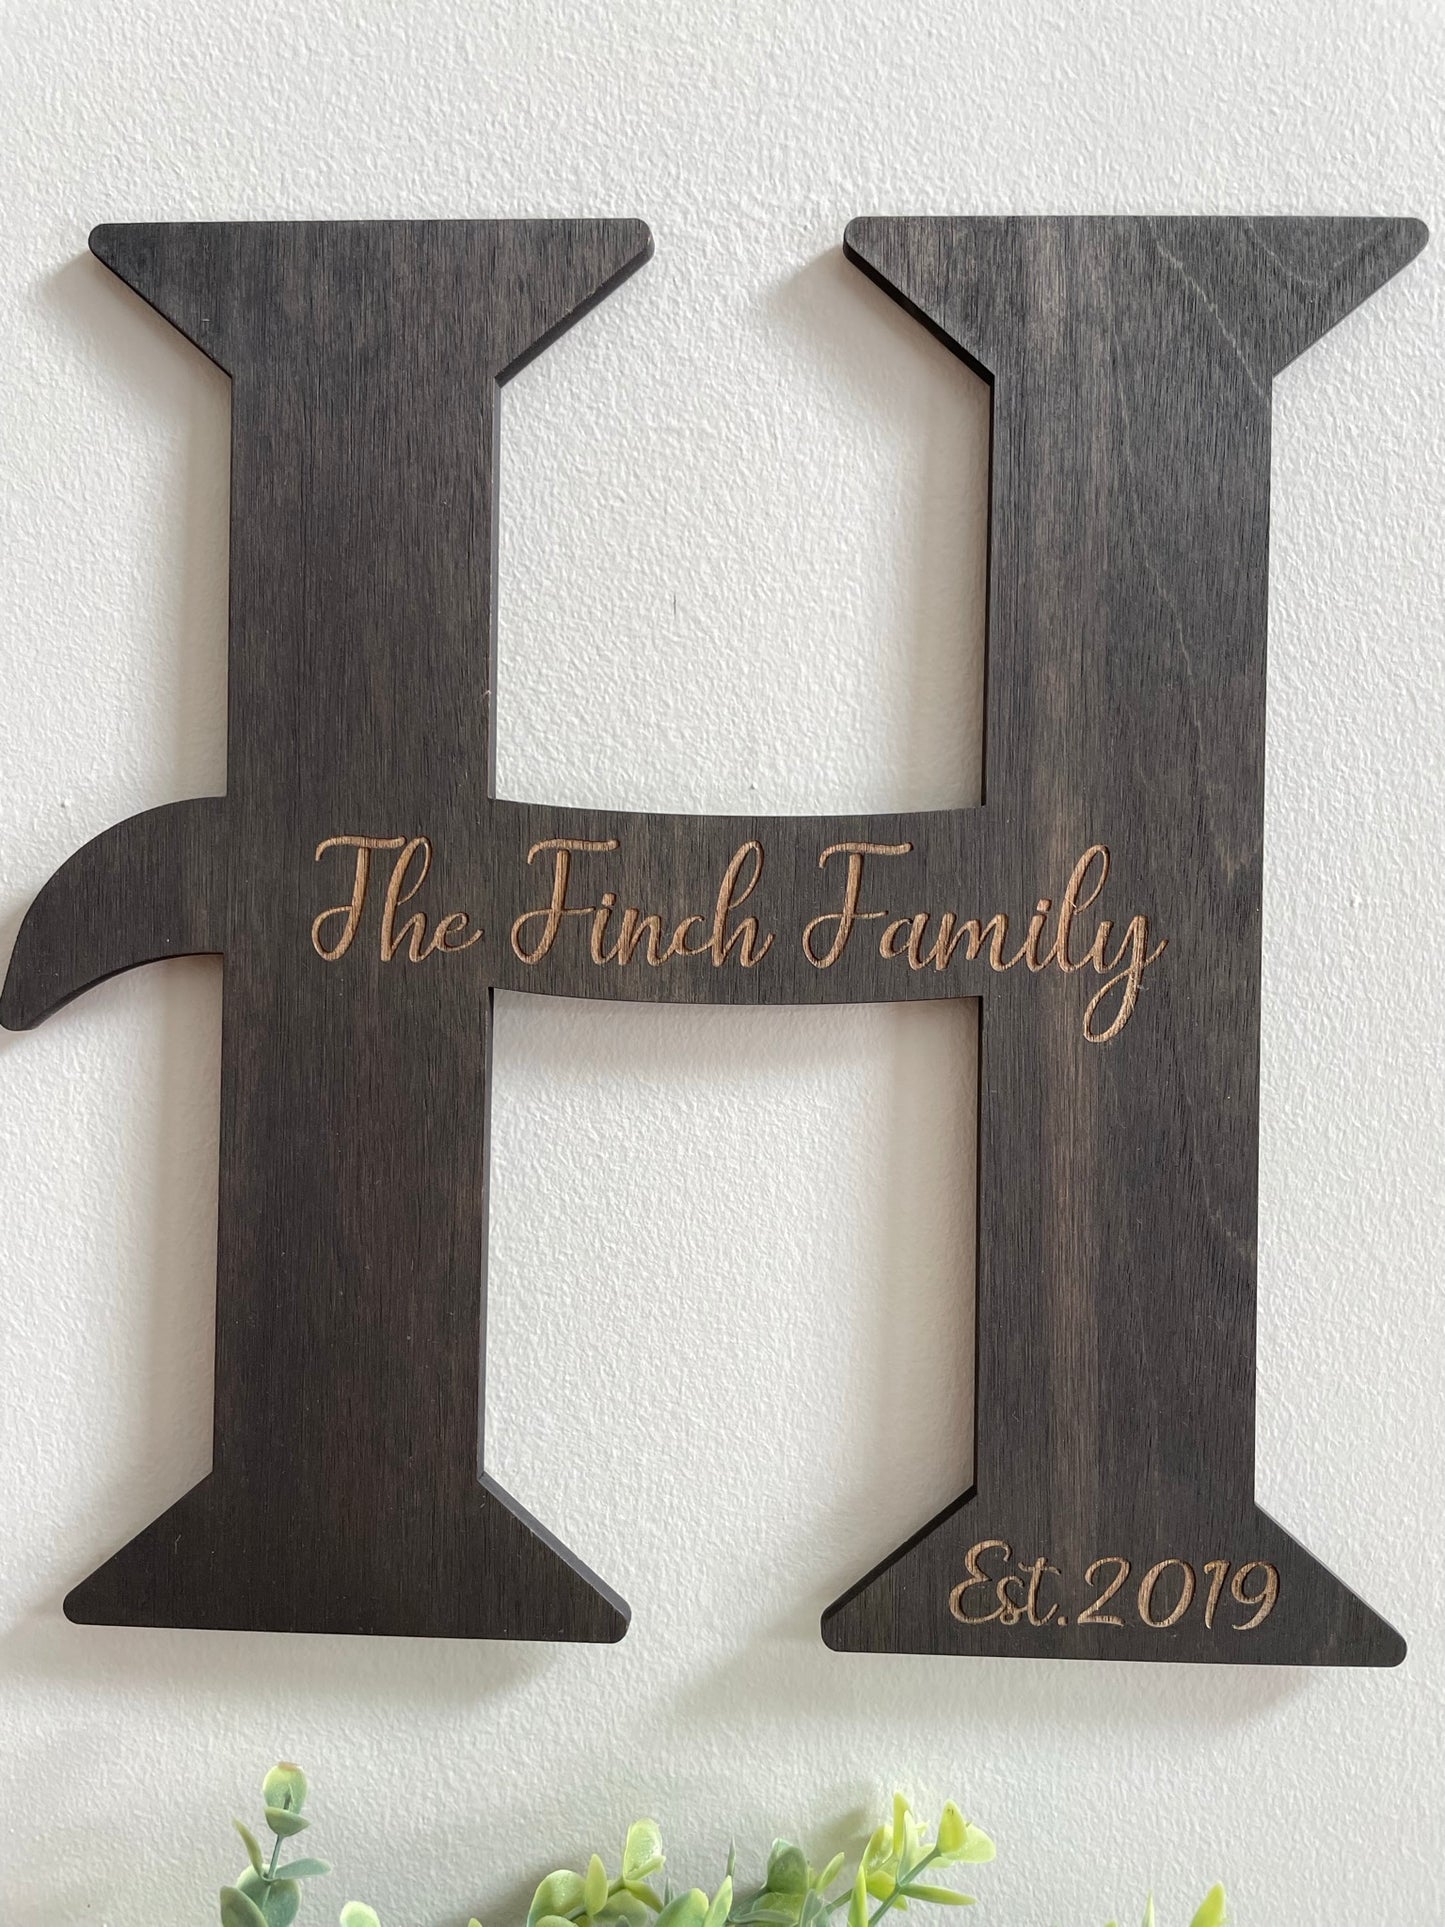 HOME - Laser Cut Wood Letters, Black Stain